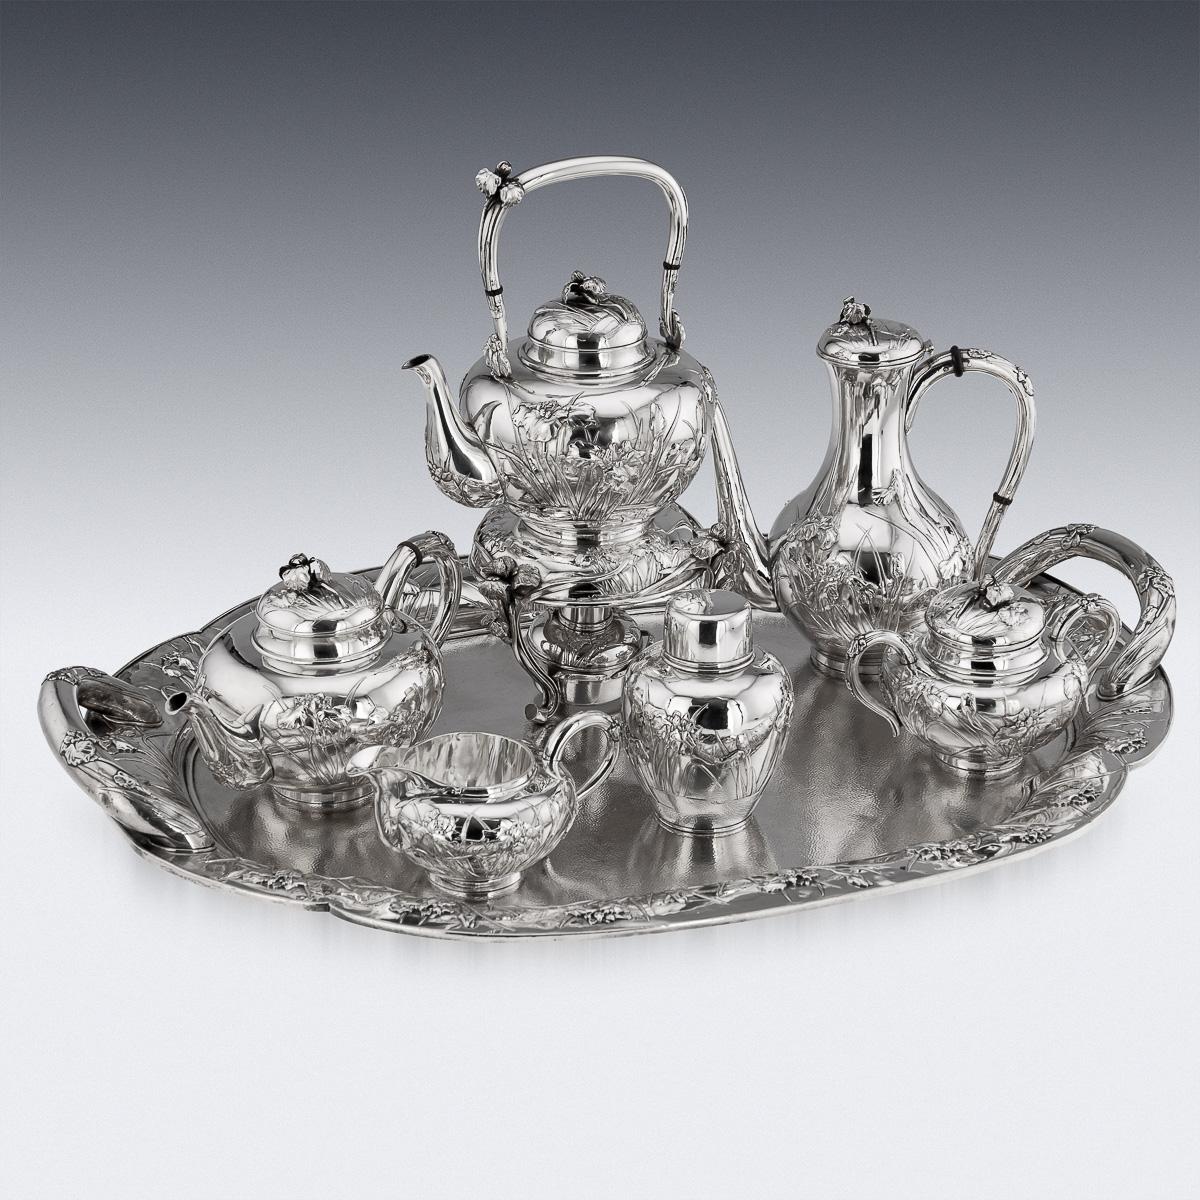 20th Century Japanese Solid Silver Tea & Coffee Service On Tray, c.1900 For Sale 1